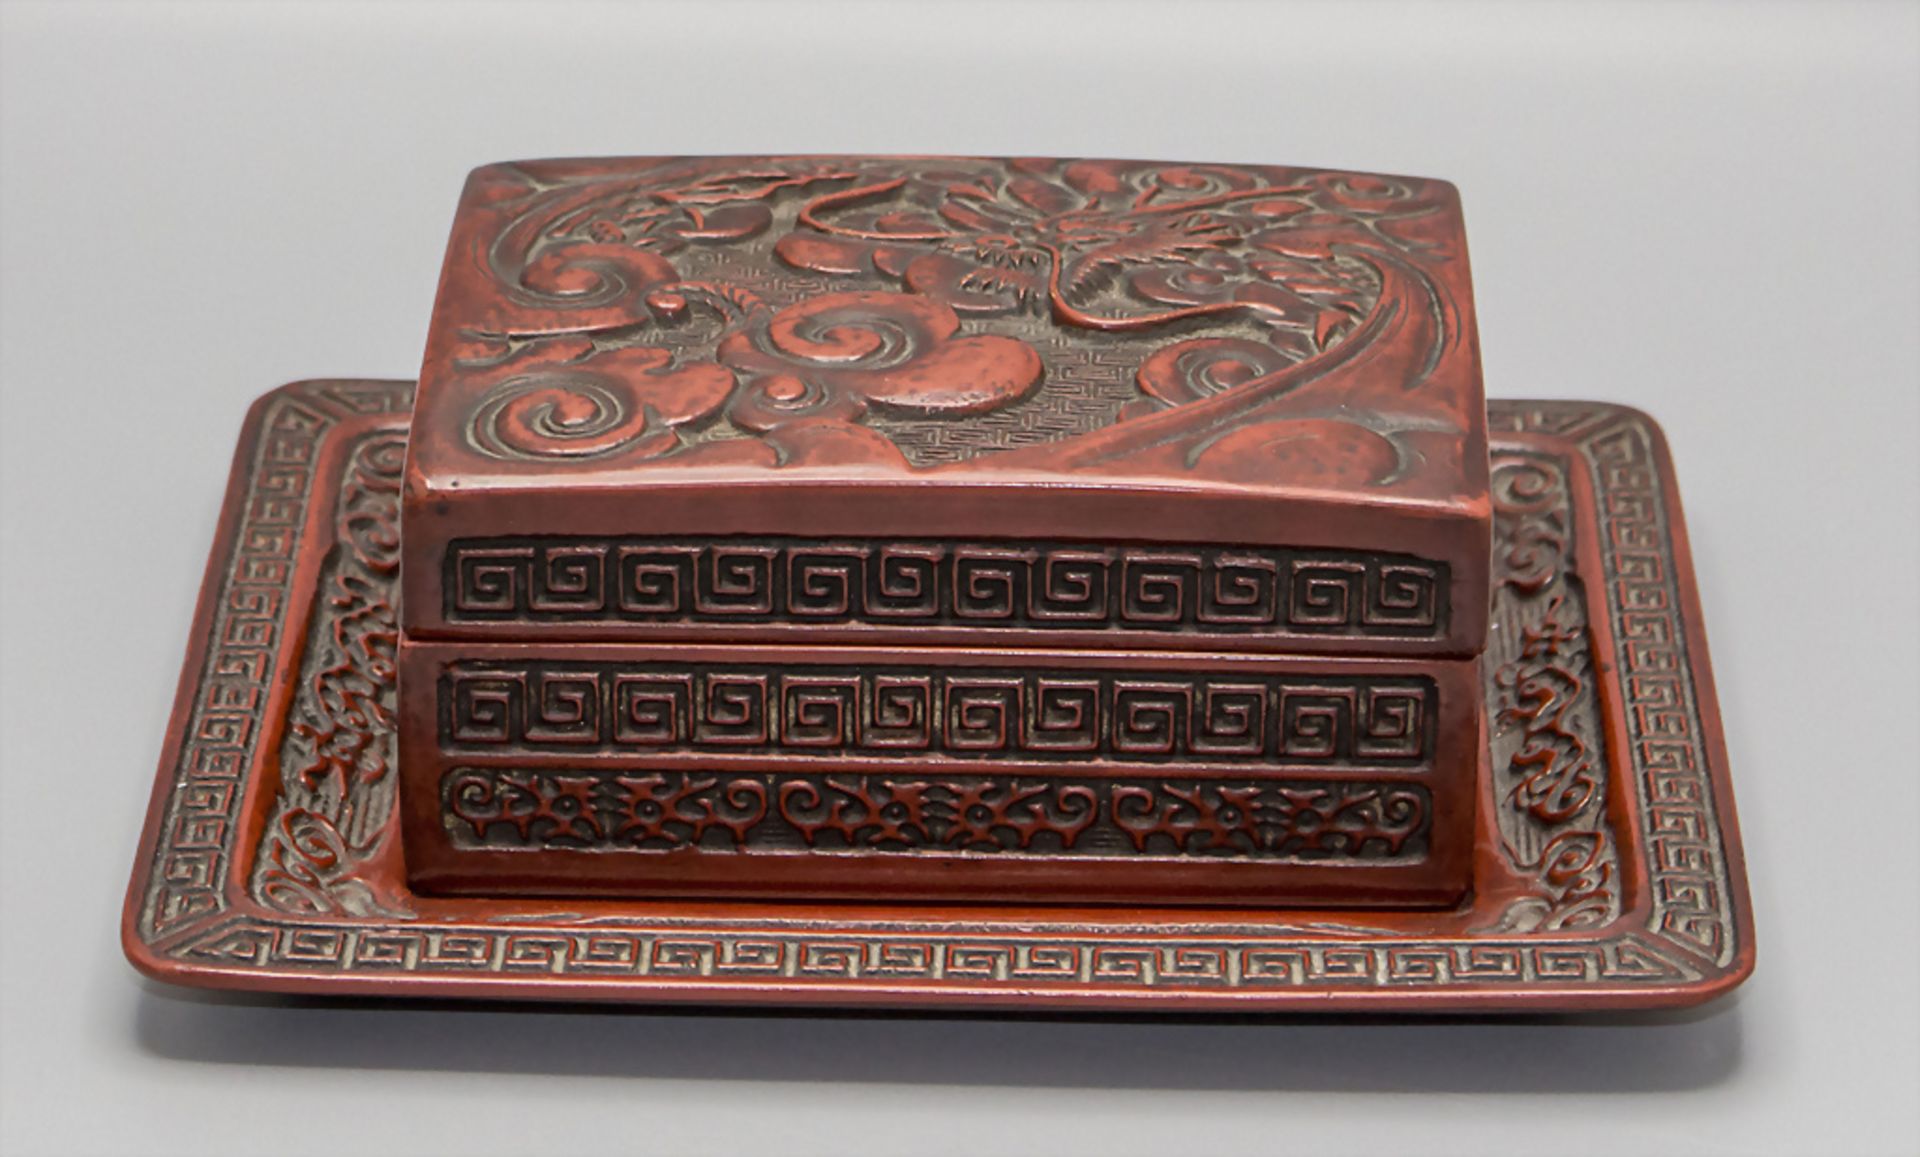 Lackdose mit Tablett / A lacquer box with tray, China, 19. Jh.